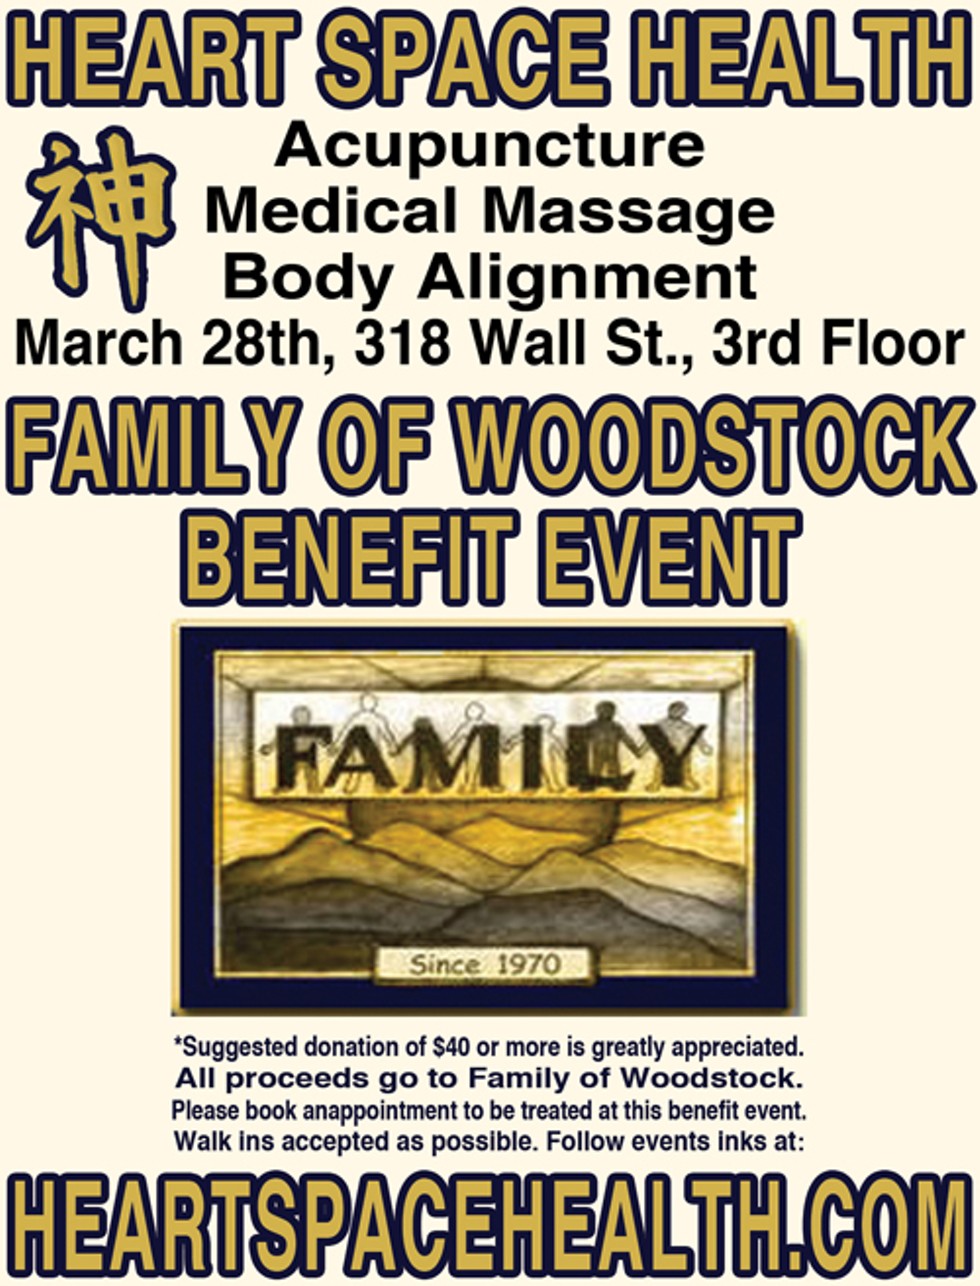 All proceeds to Family of Woodstock, come get treated on March 28th.